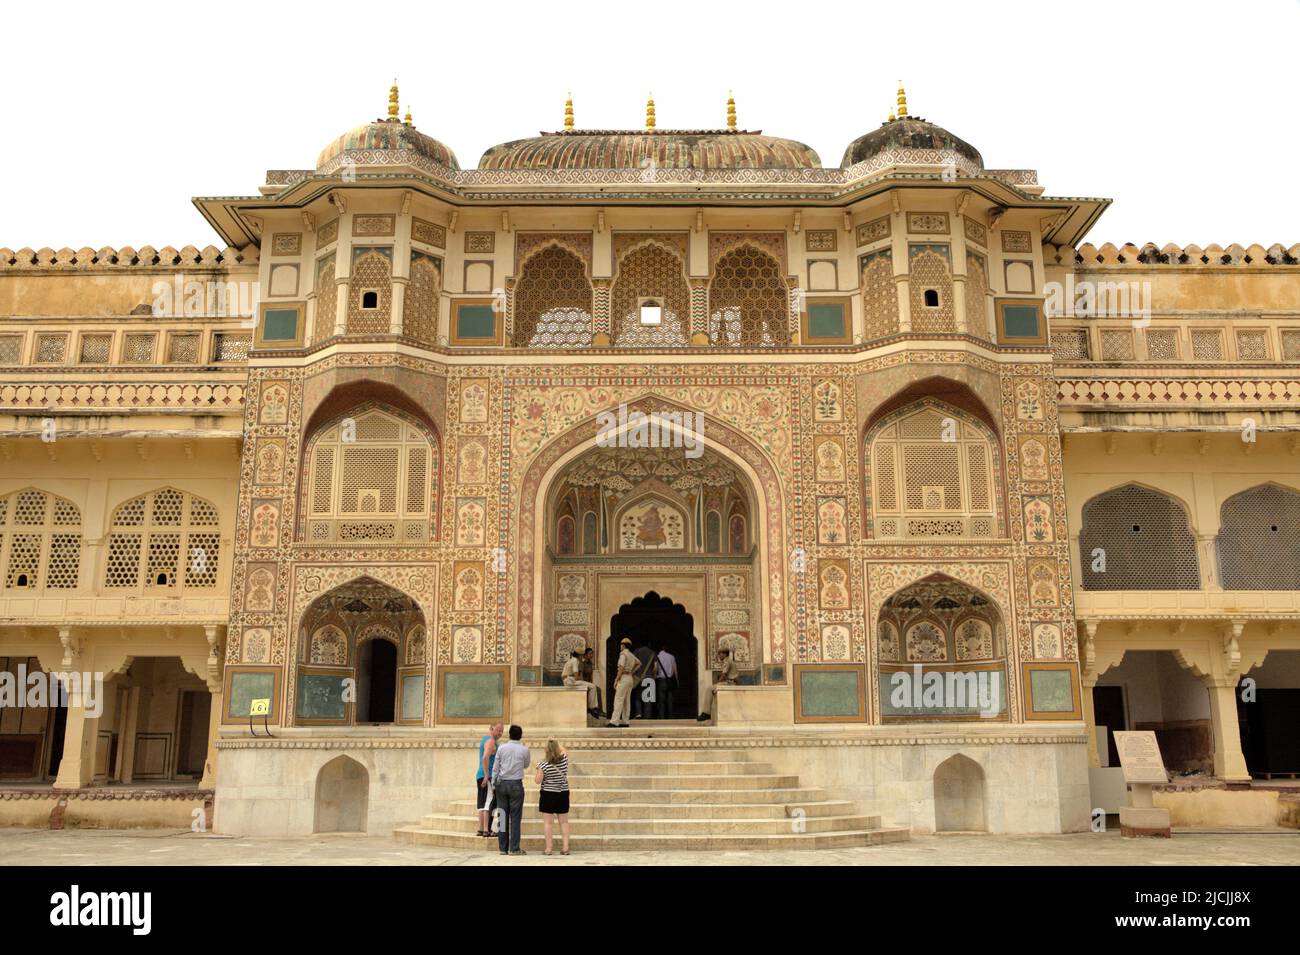 Facade of Ganesh Pol Entrance in Rajput architectural style, with an upper section with windows where ladies from royal family used to watch events at Amer Fort in Amer, Rajasthan, India. Stock Photo